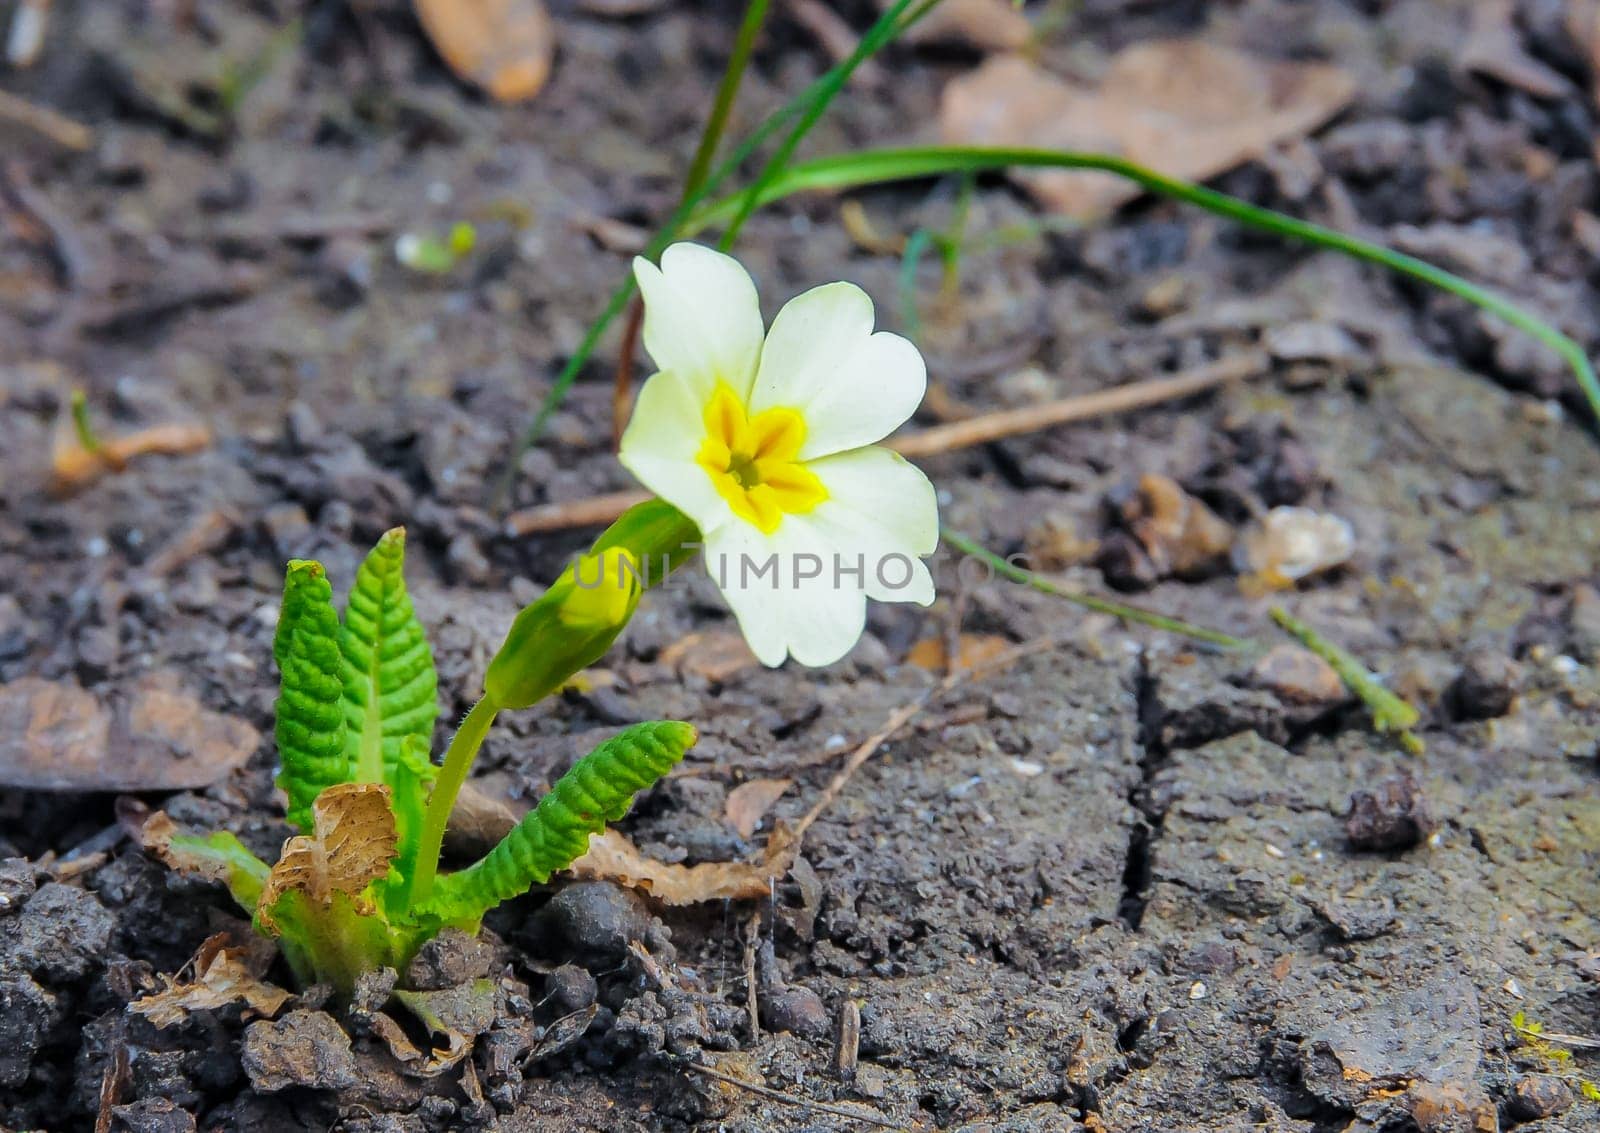 (Primula elatior), early flowering garden plant with white or pink flowers by Hydrobiolog